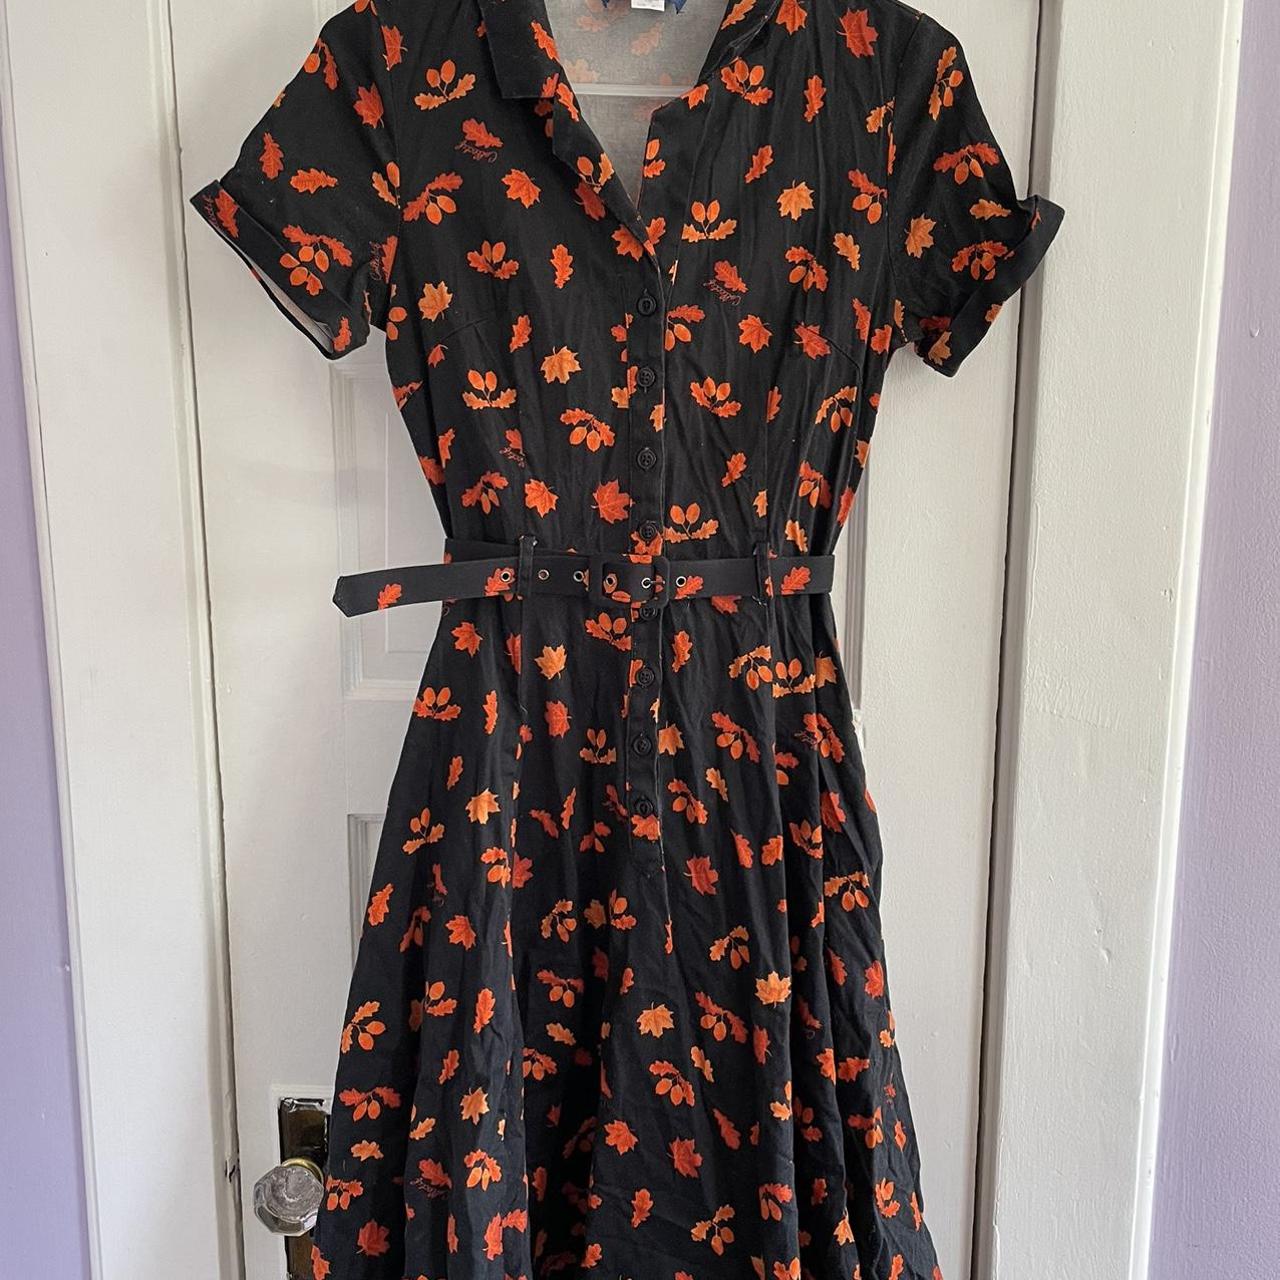 Product Image 3 - Collectif discontinued Autumn Acorn Dress
Size